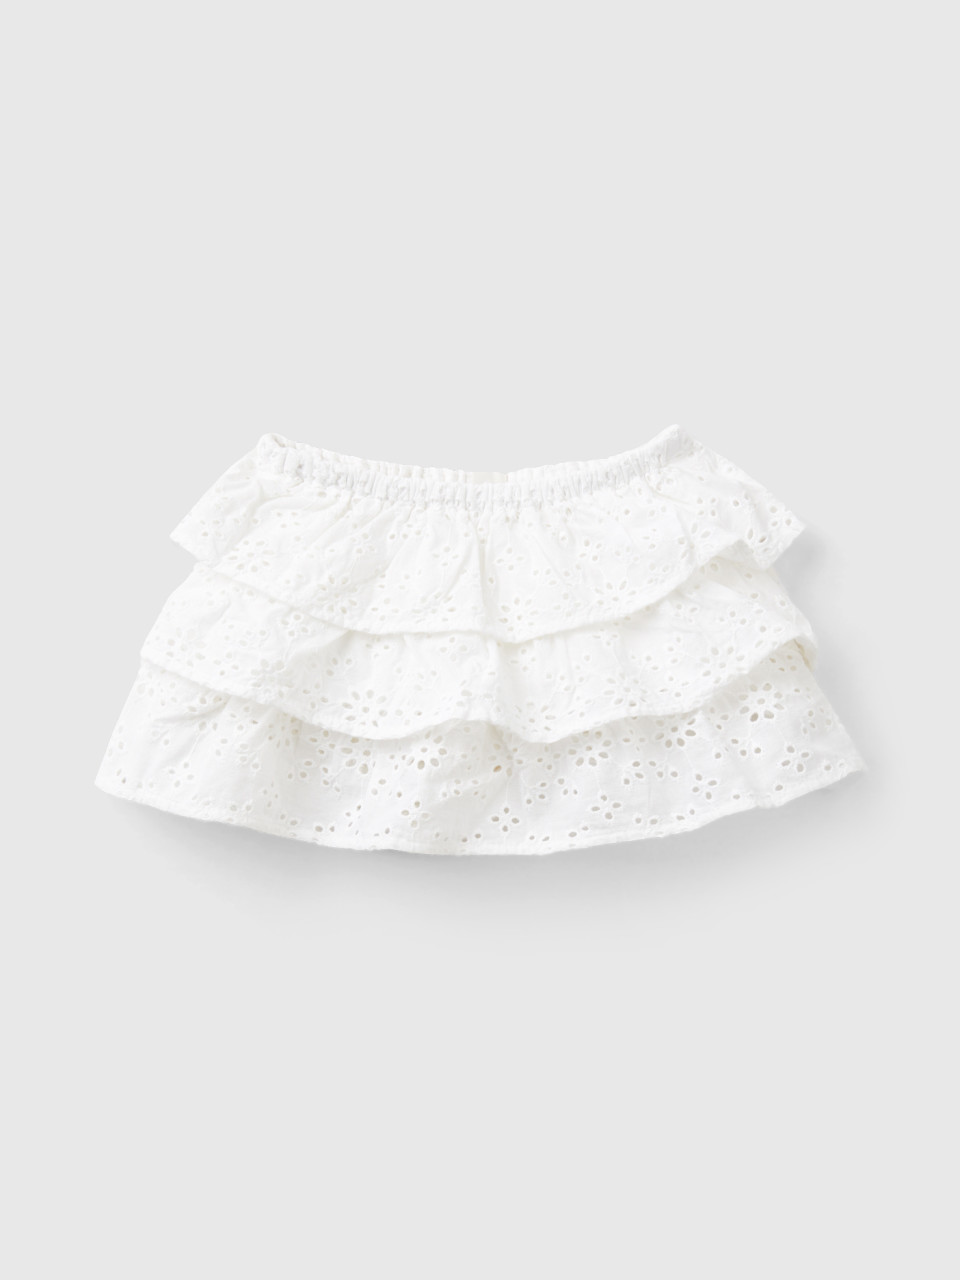 Benetton, Skirt With Broderie Anglaise, White, Kids